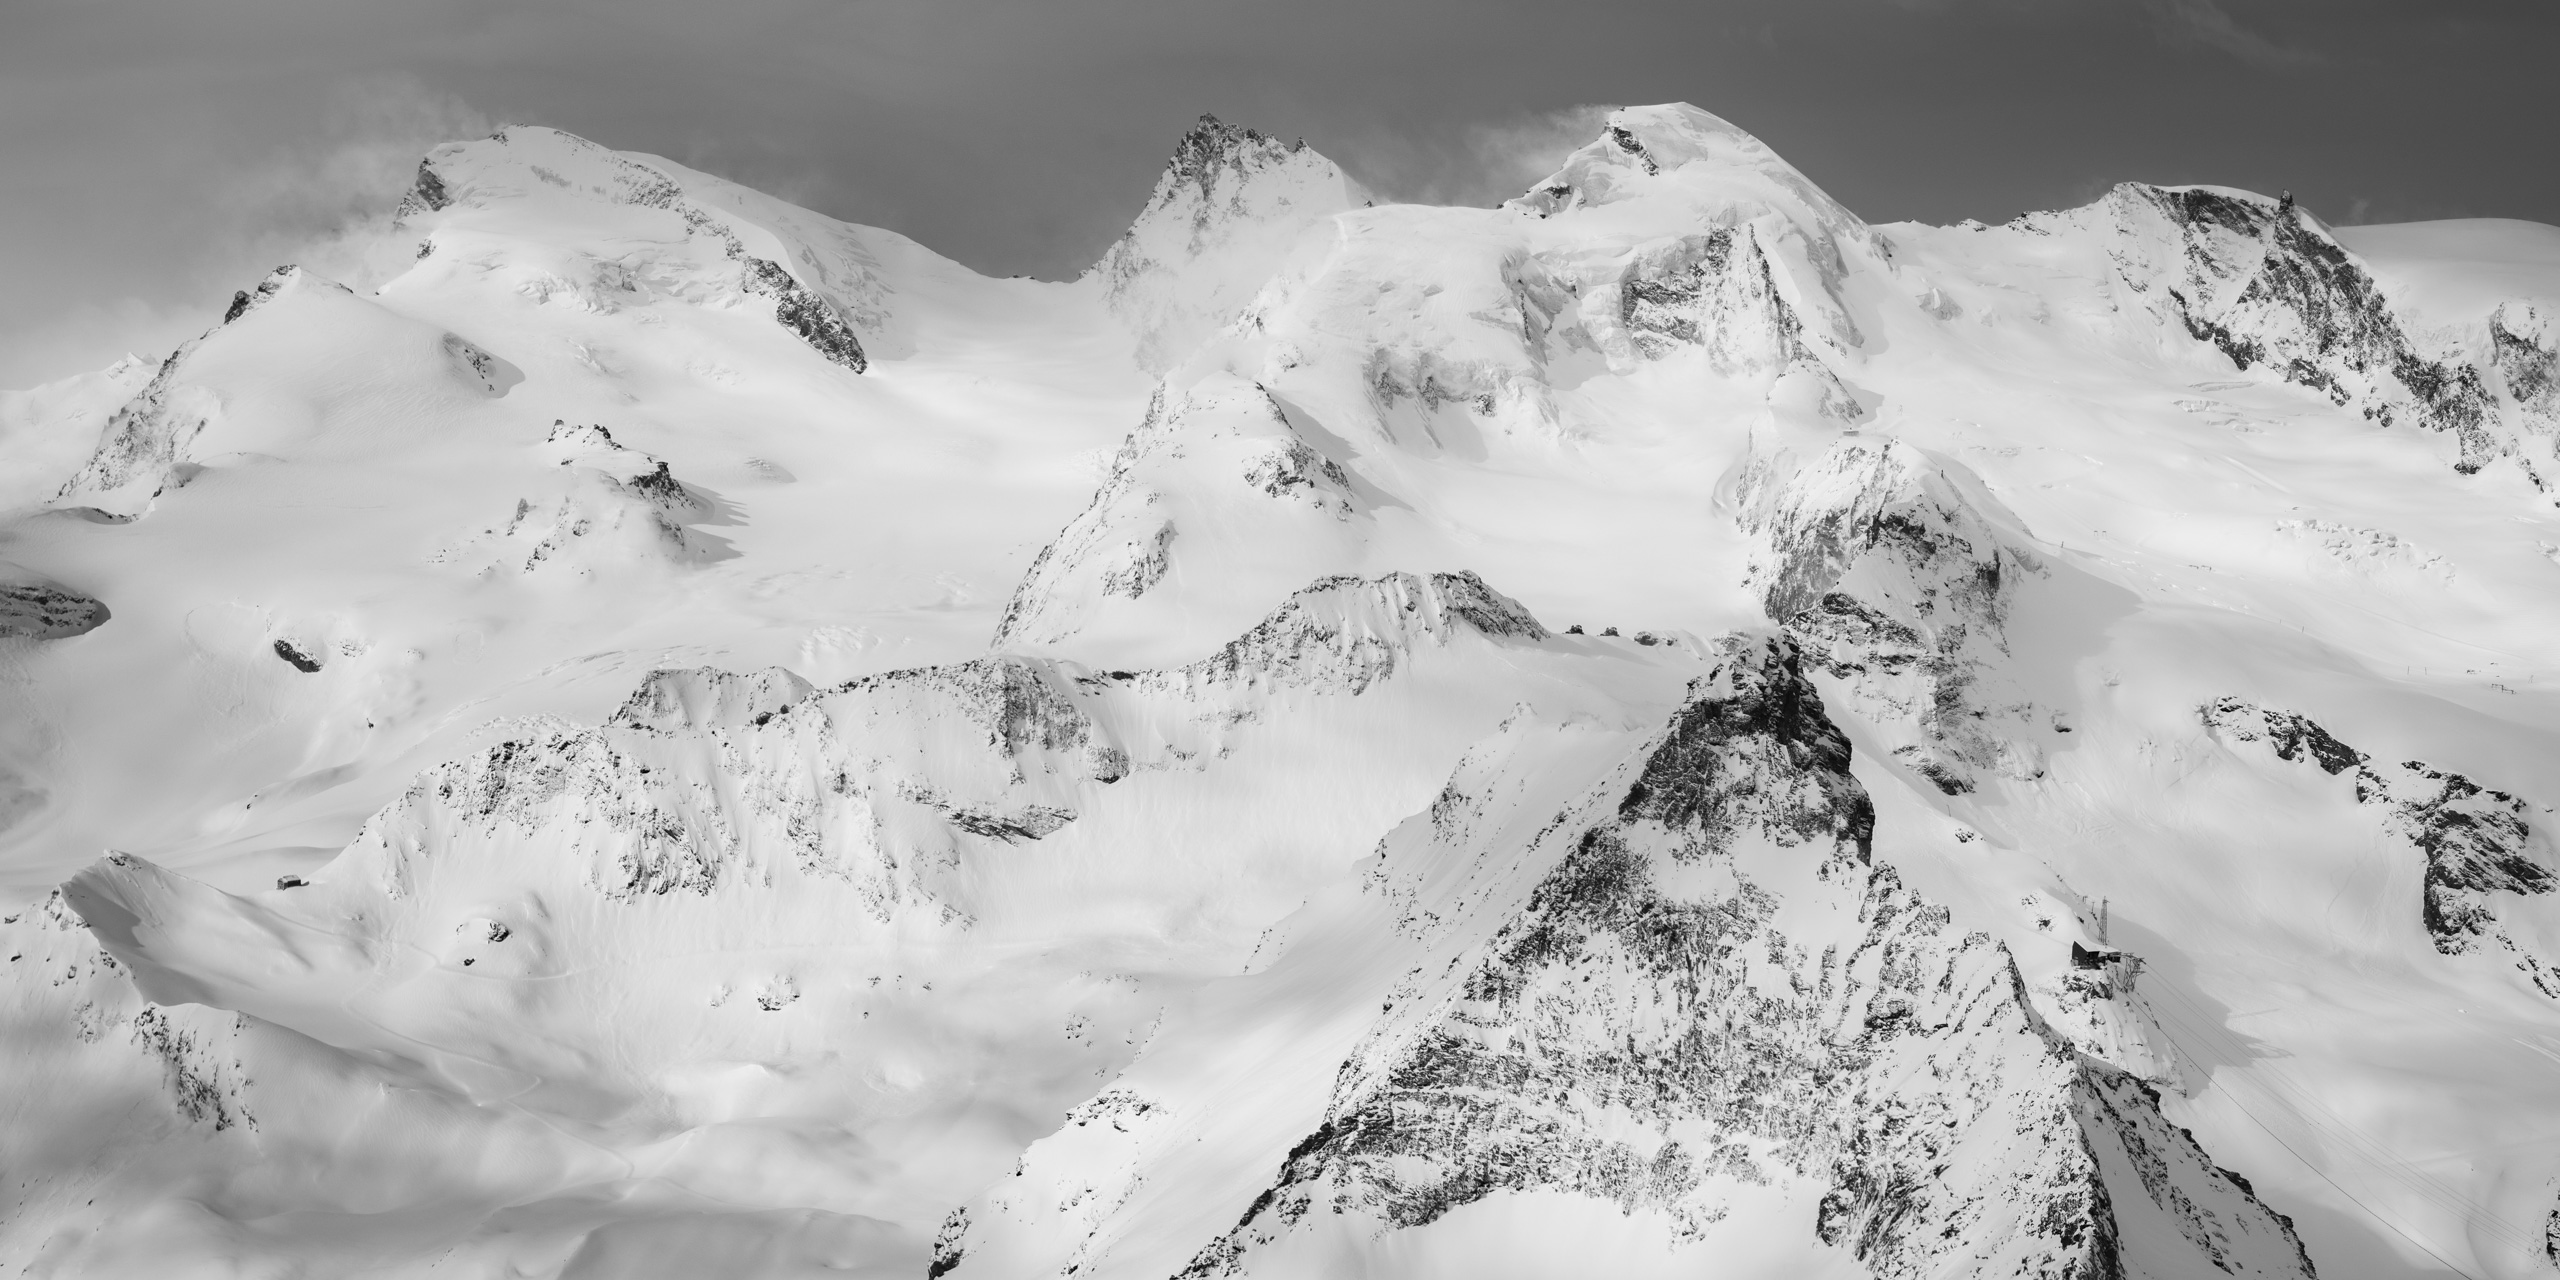 Panoramic mountain prints of Strahlhorn - Rimpfischhorn - Allalinhorn in black and white